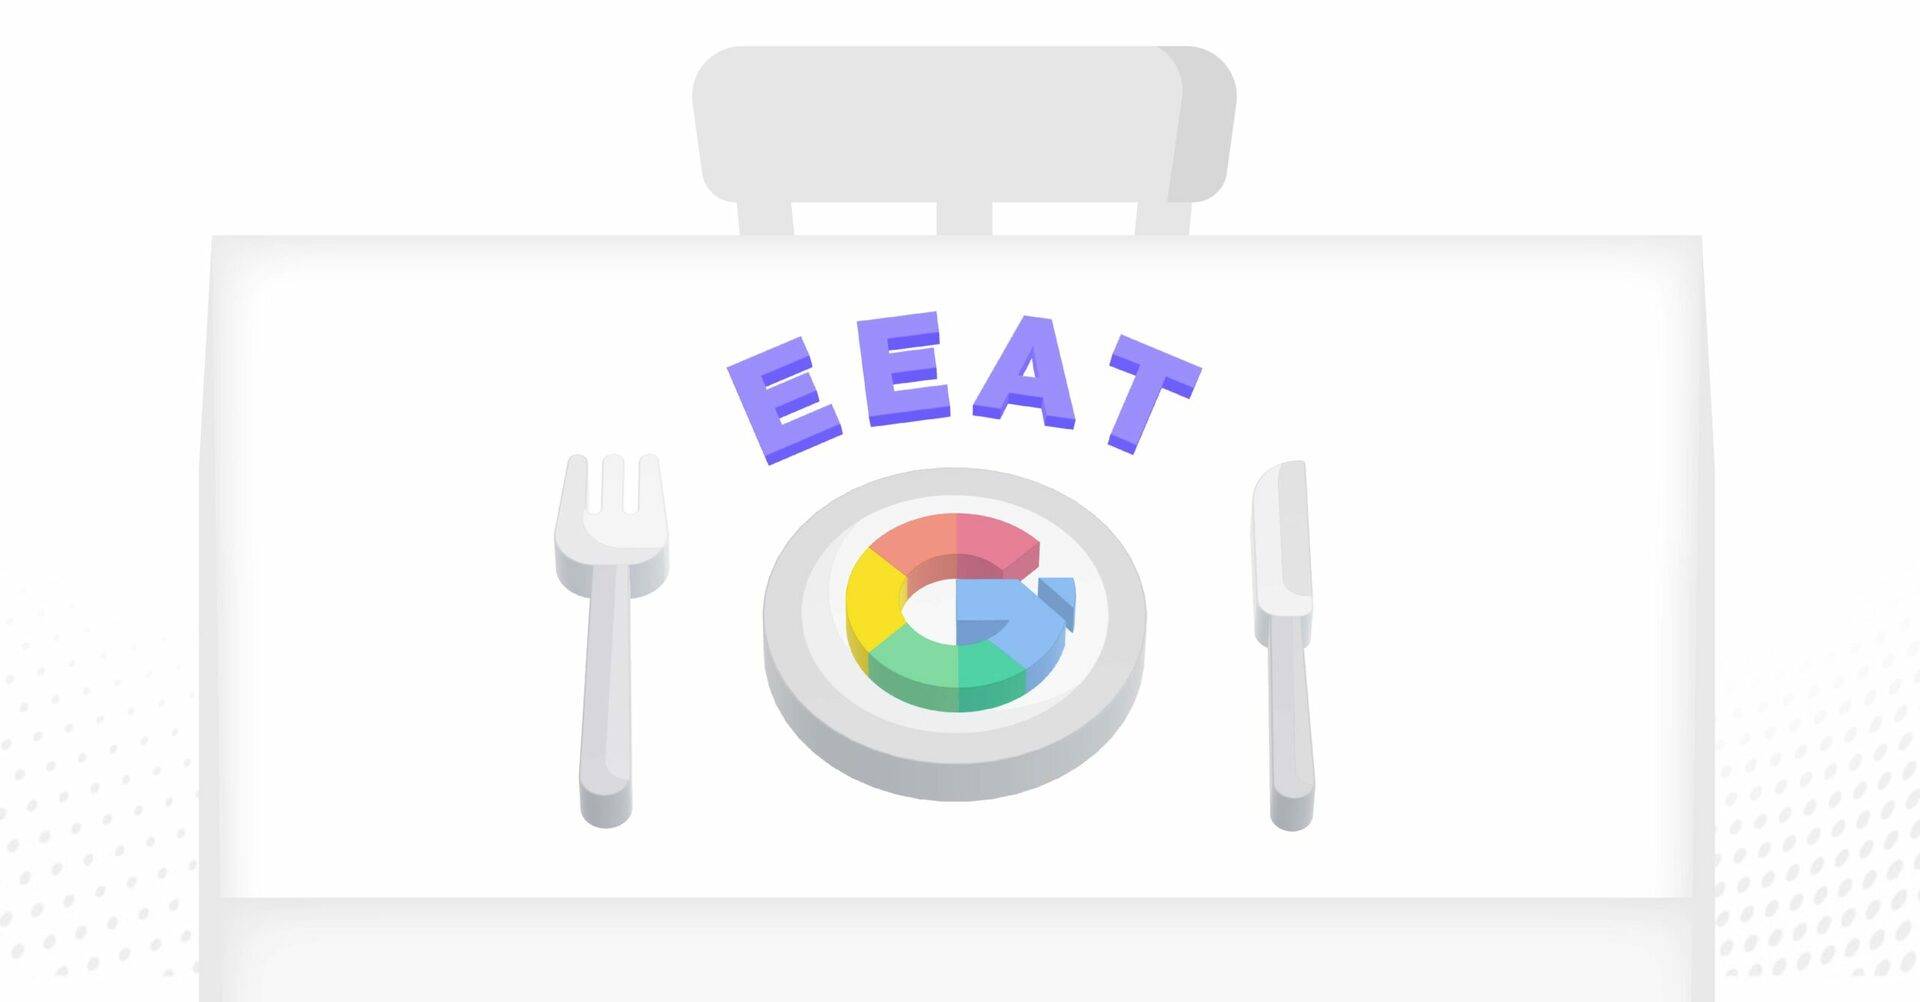 What You Need to Know About Google’s “E-E-A-T” Content Update